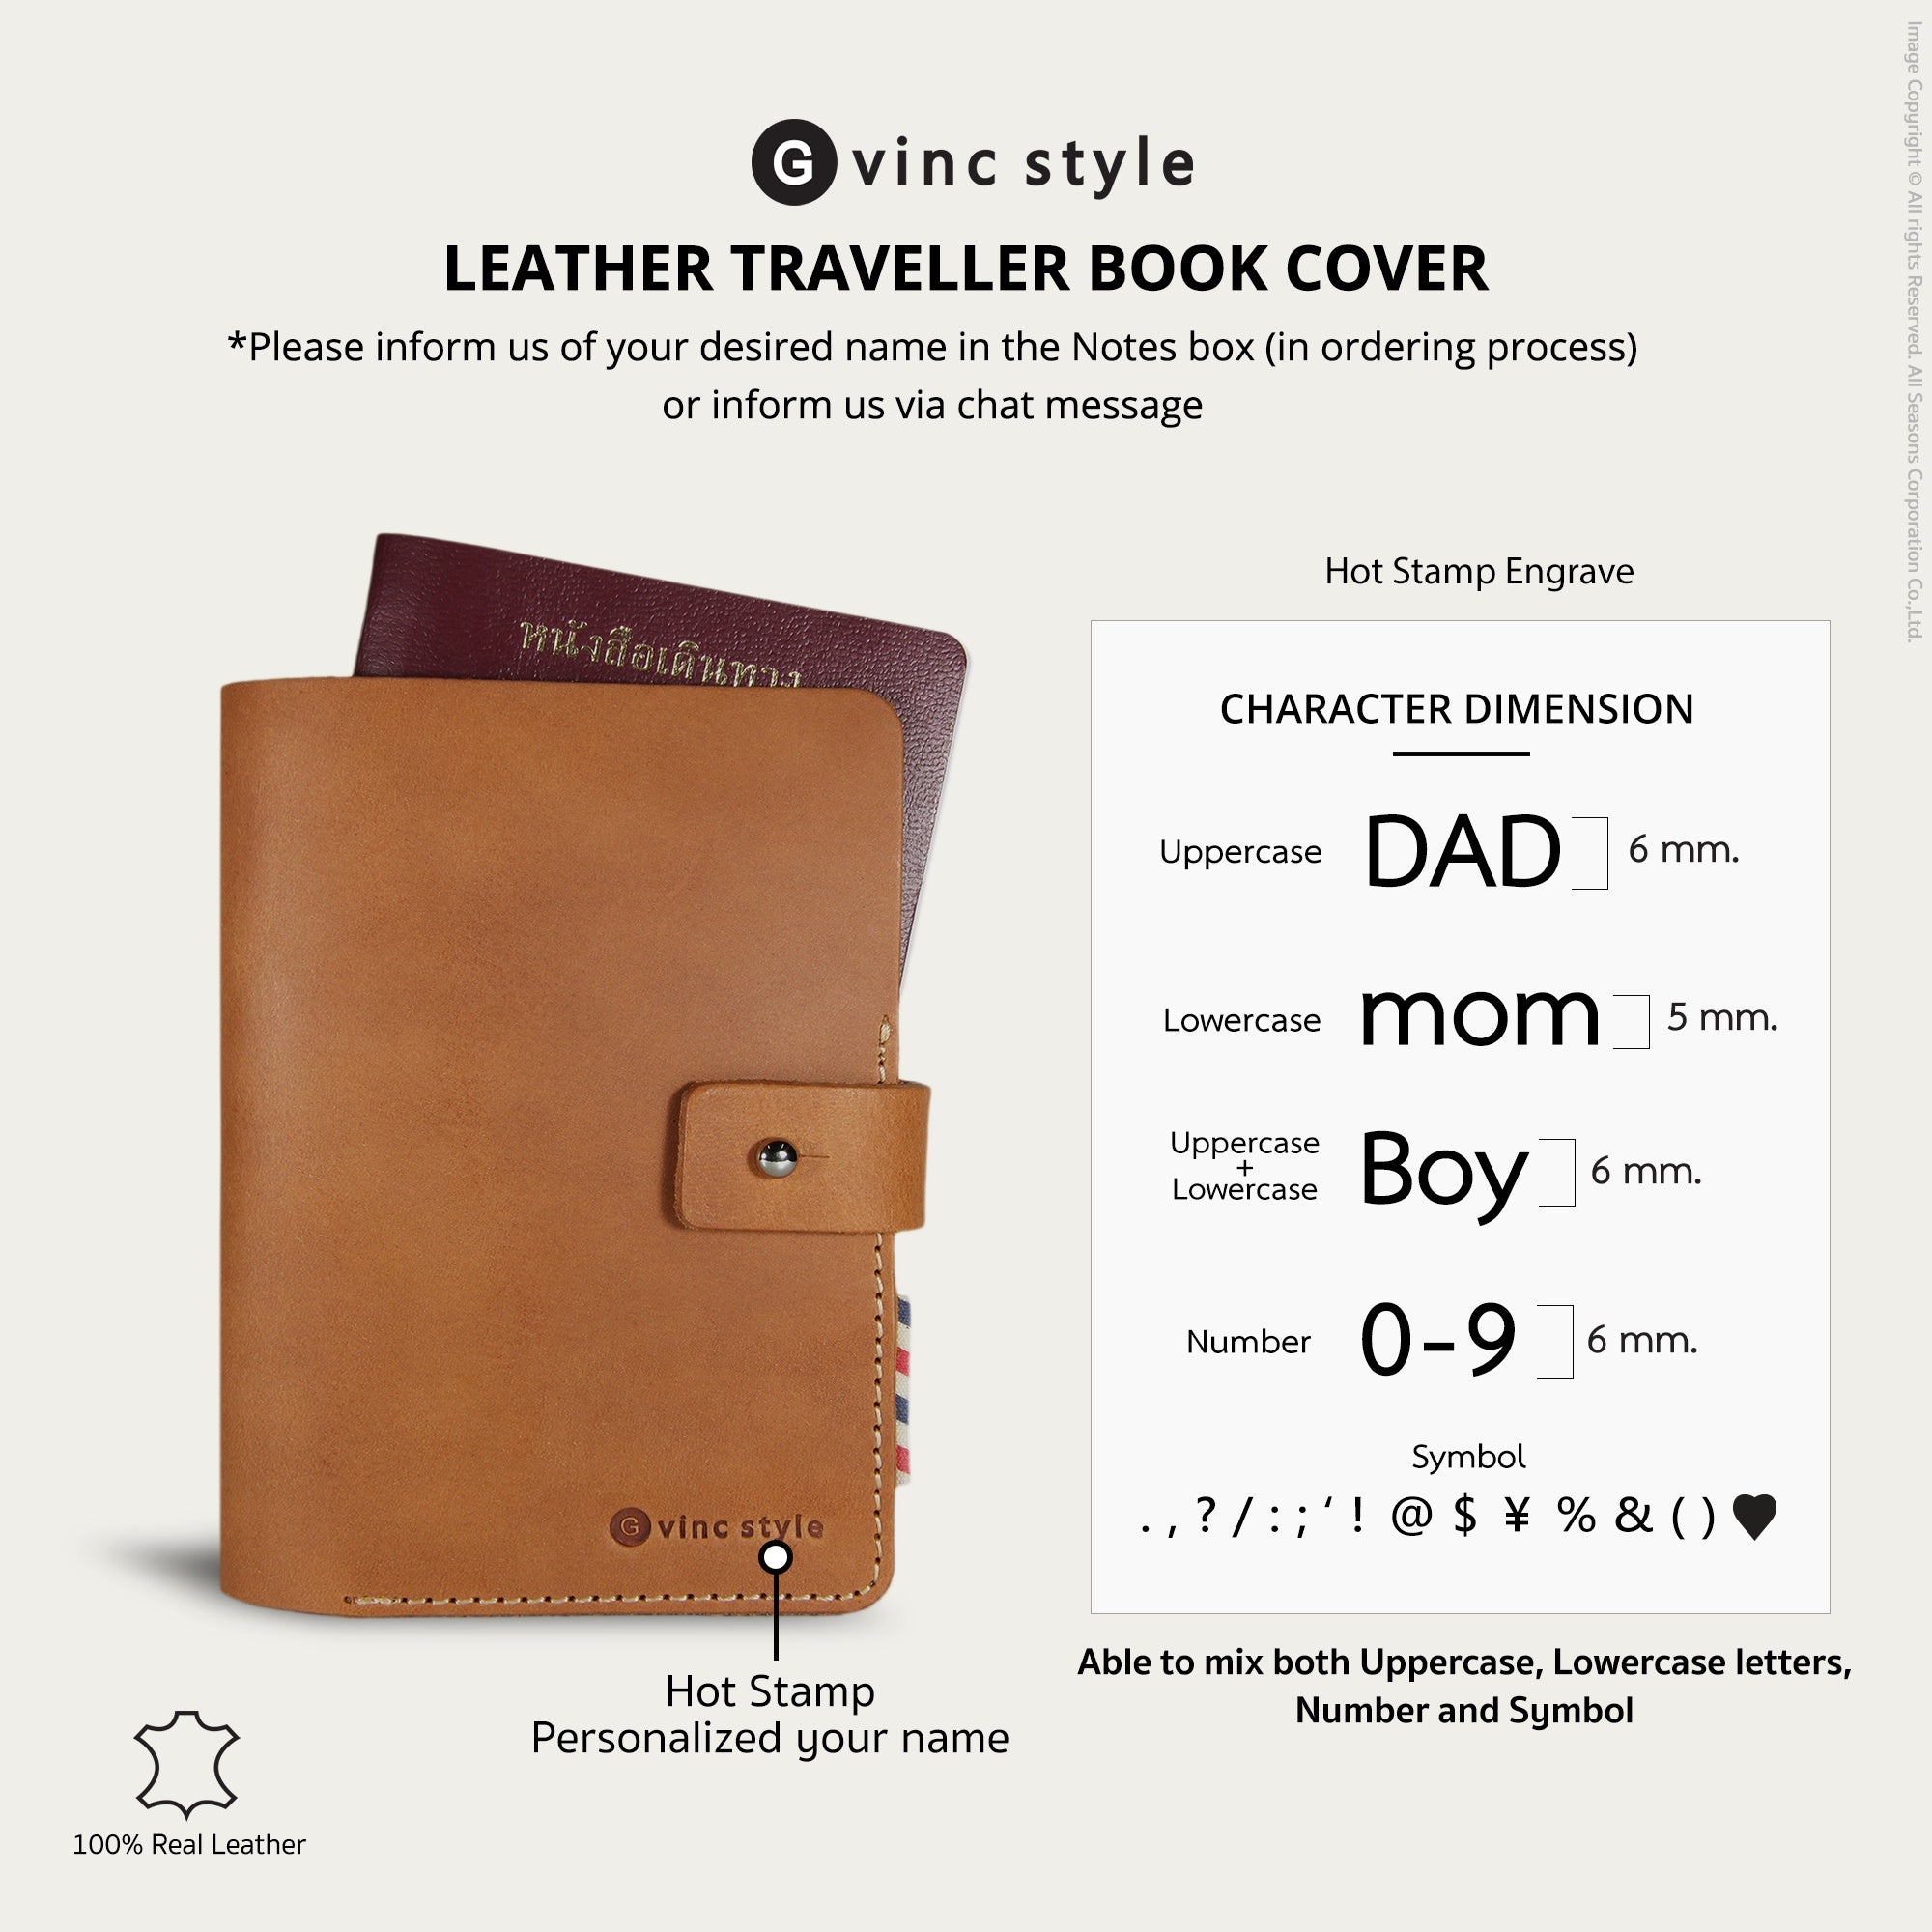 Personalized Leather Traveller Book Cover